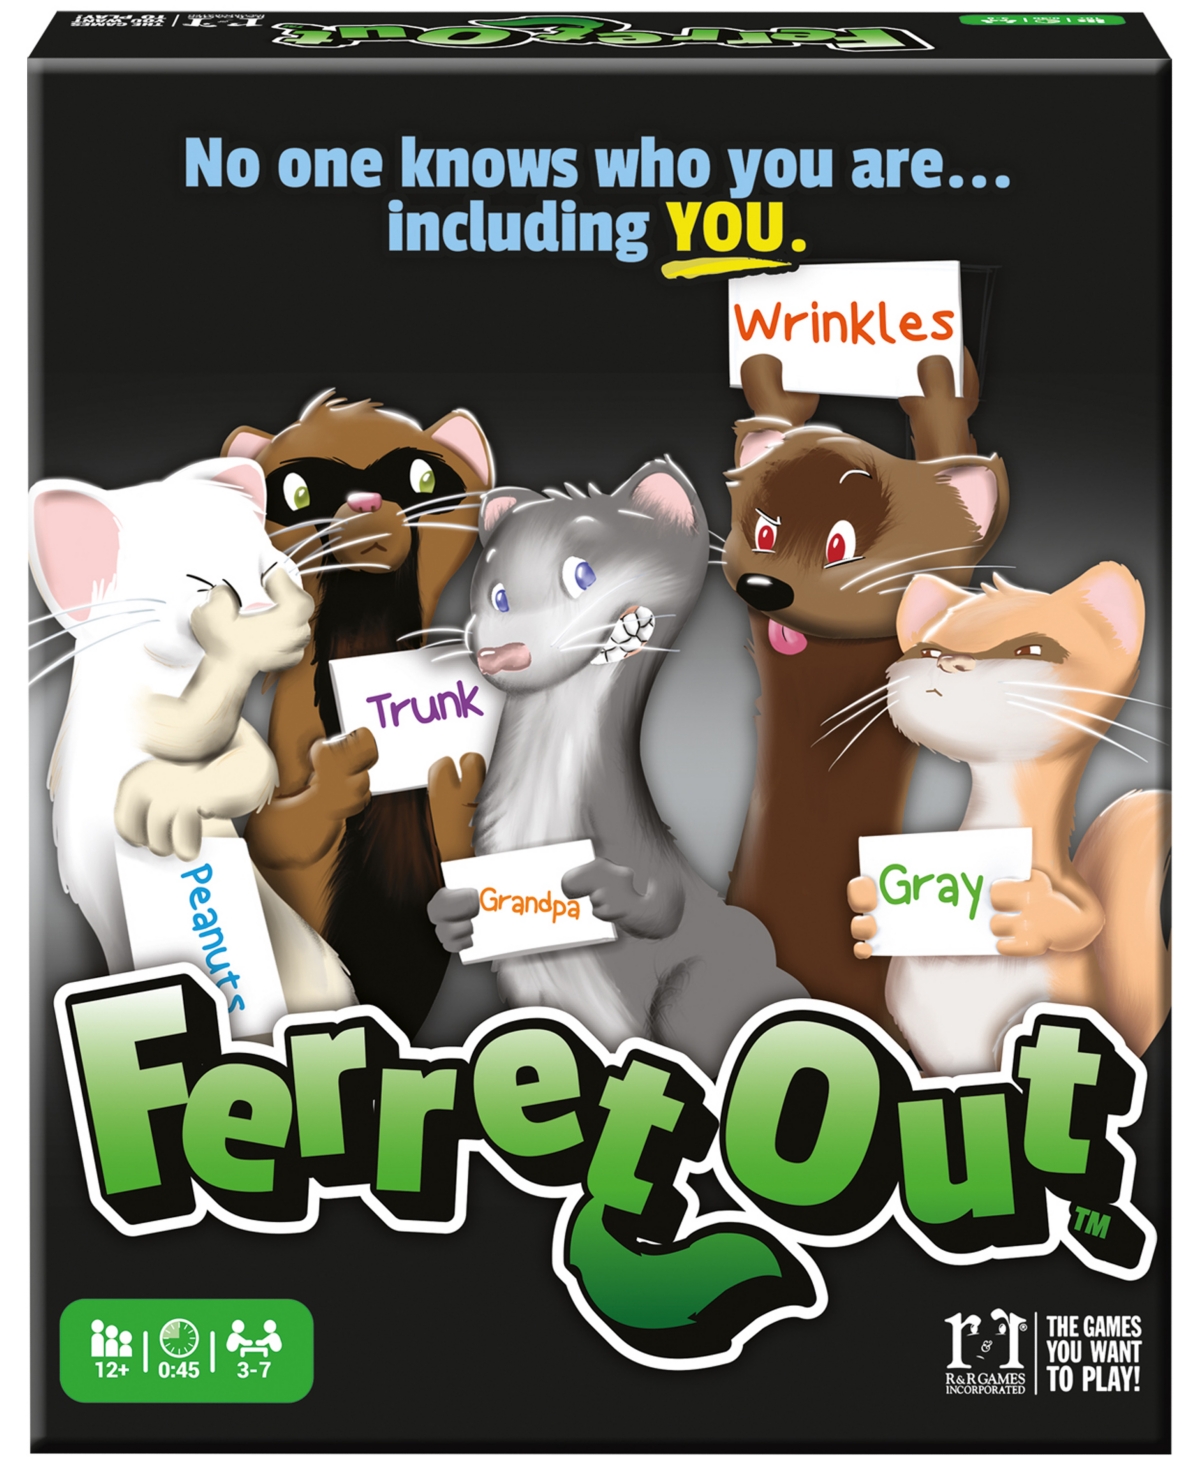 University Games Kids' R R Games Ferret Out Family Game In No Color